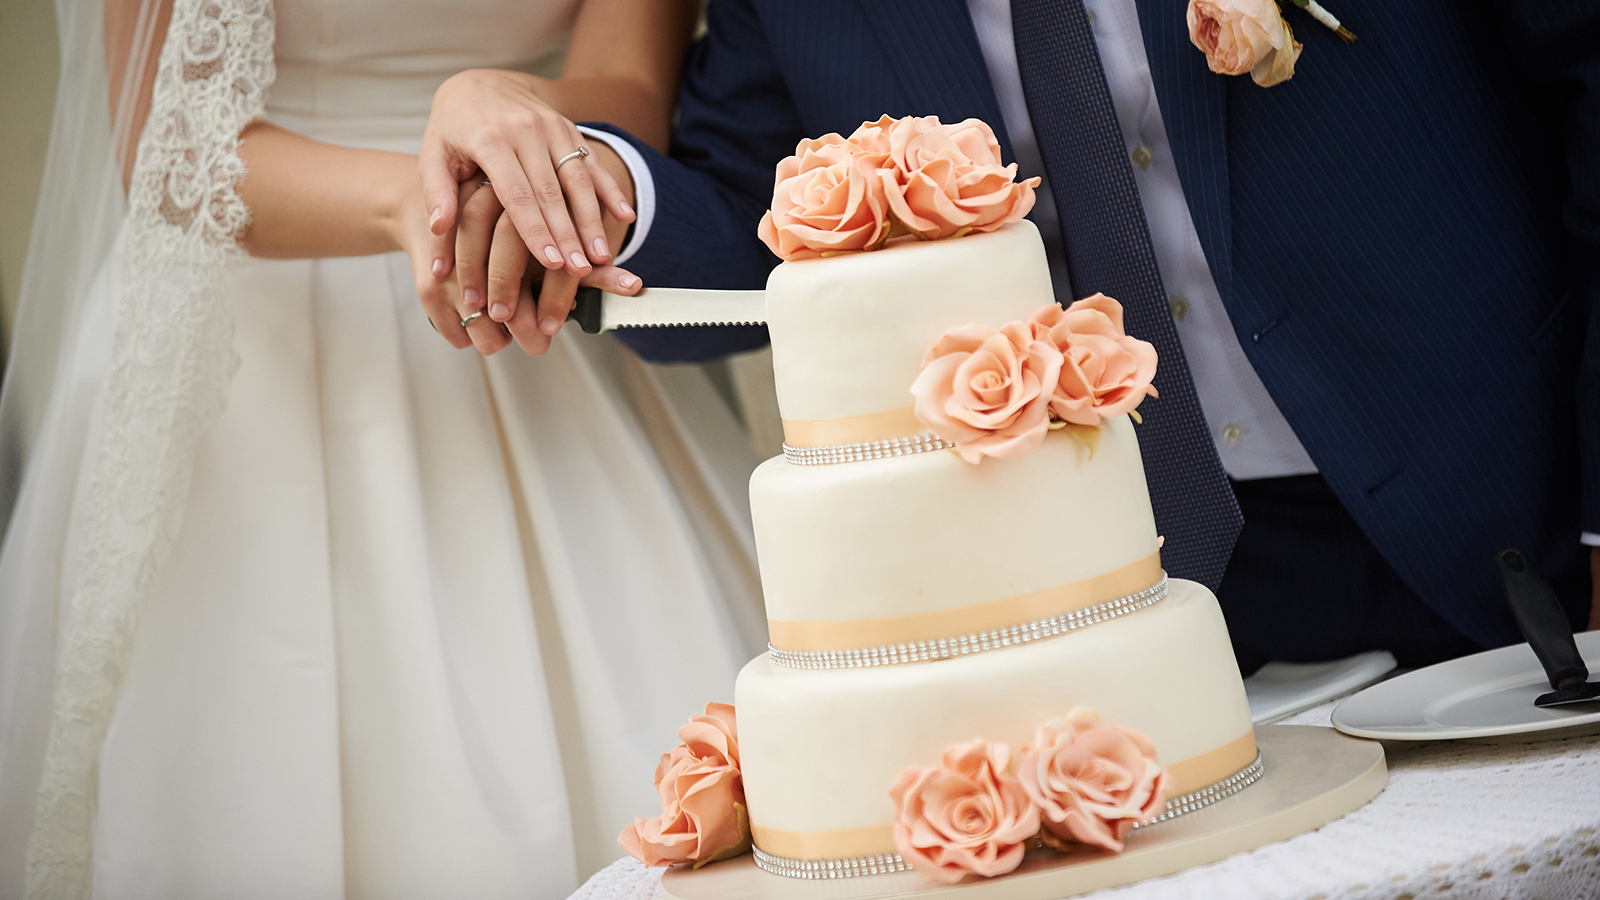 bride and groom cut the wedding cake. The cake is decorated with beige and peach-colored roses. groom is dressed in blue wedding suit and bride in a white wedding dress.